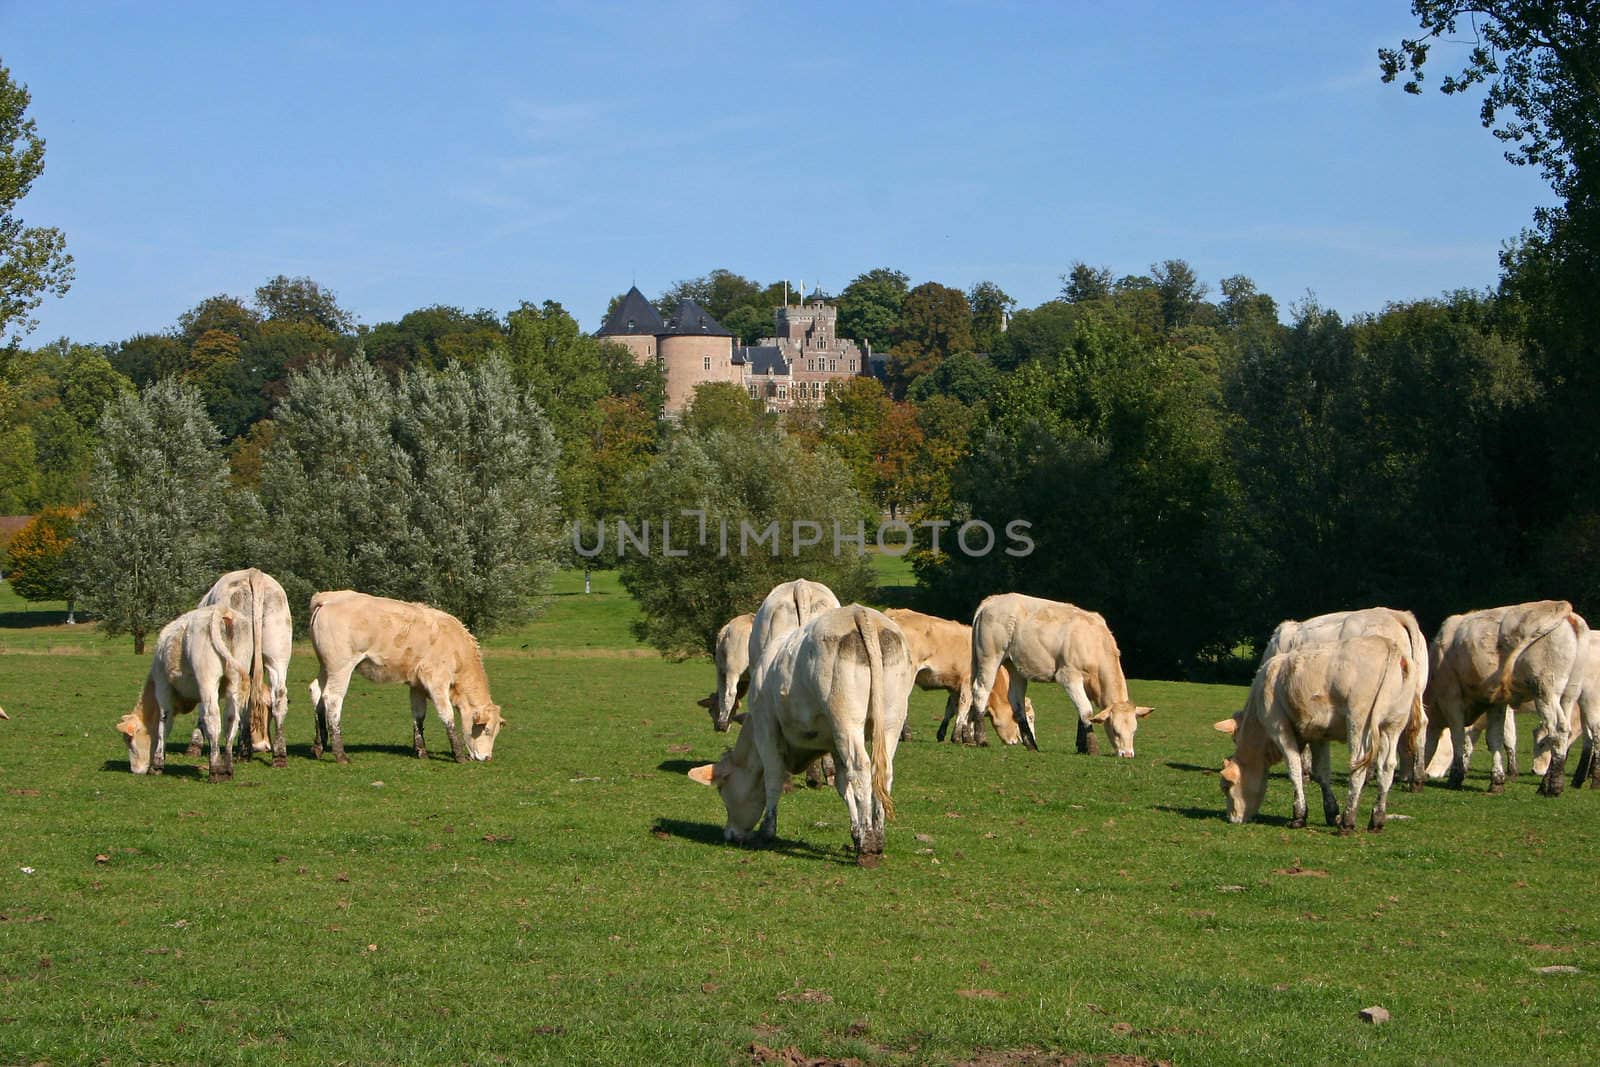 Some cows in the meadow before the castle of Gaasbeek